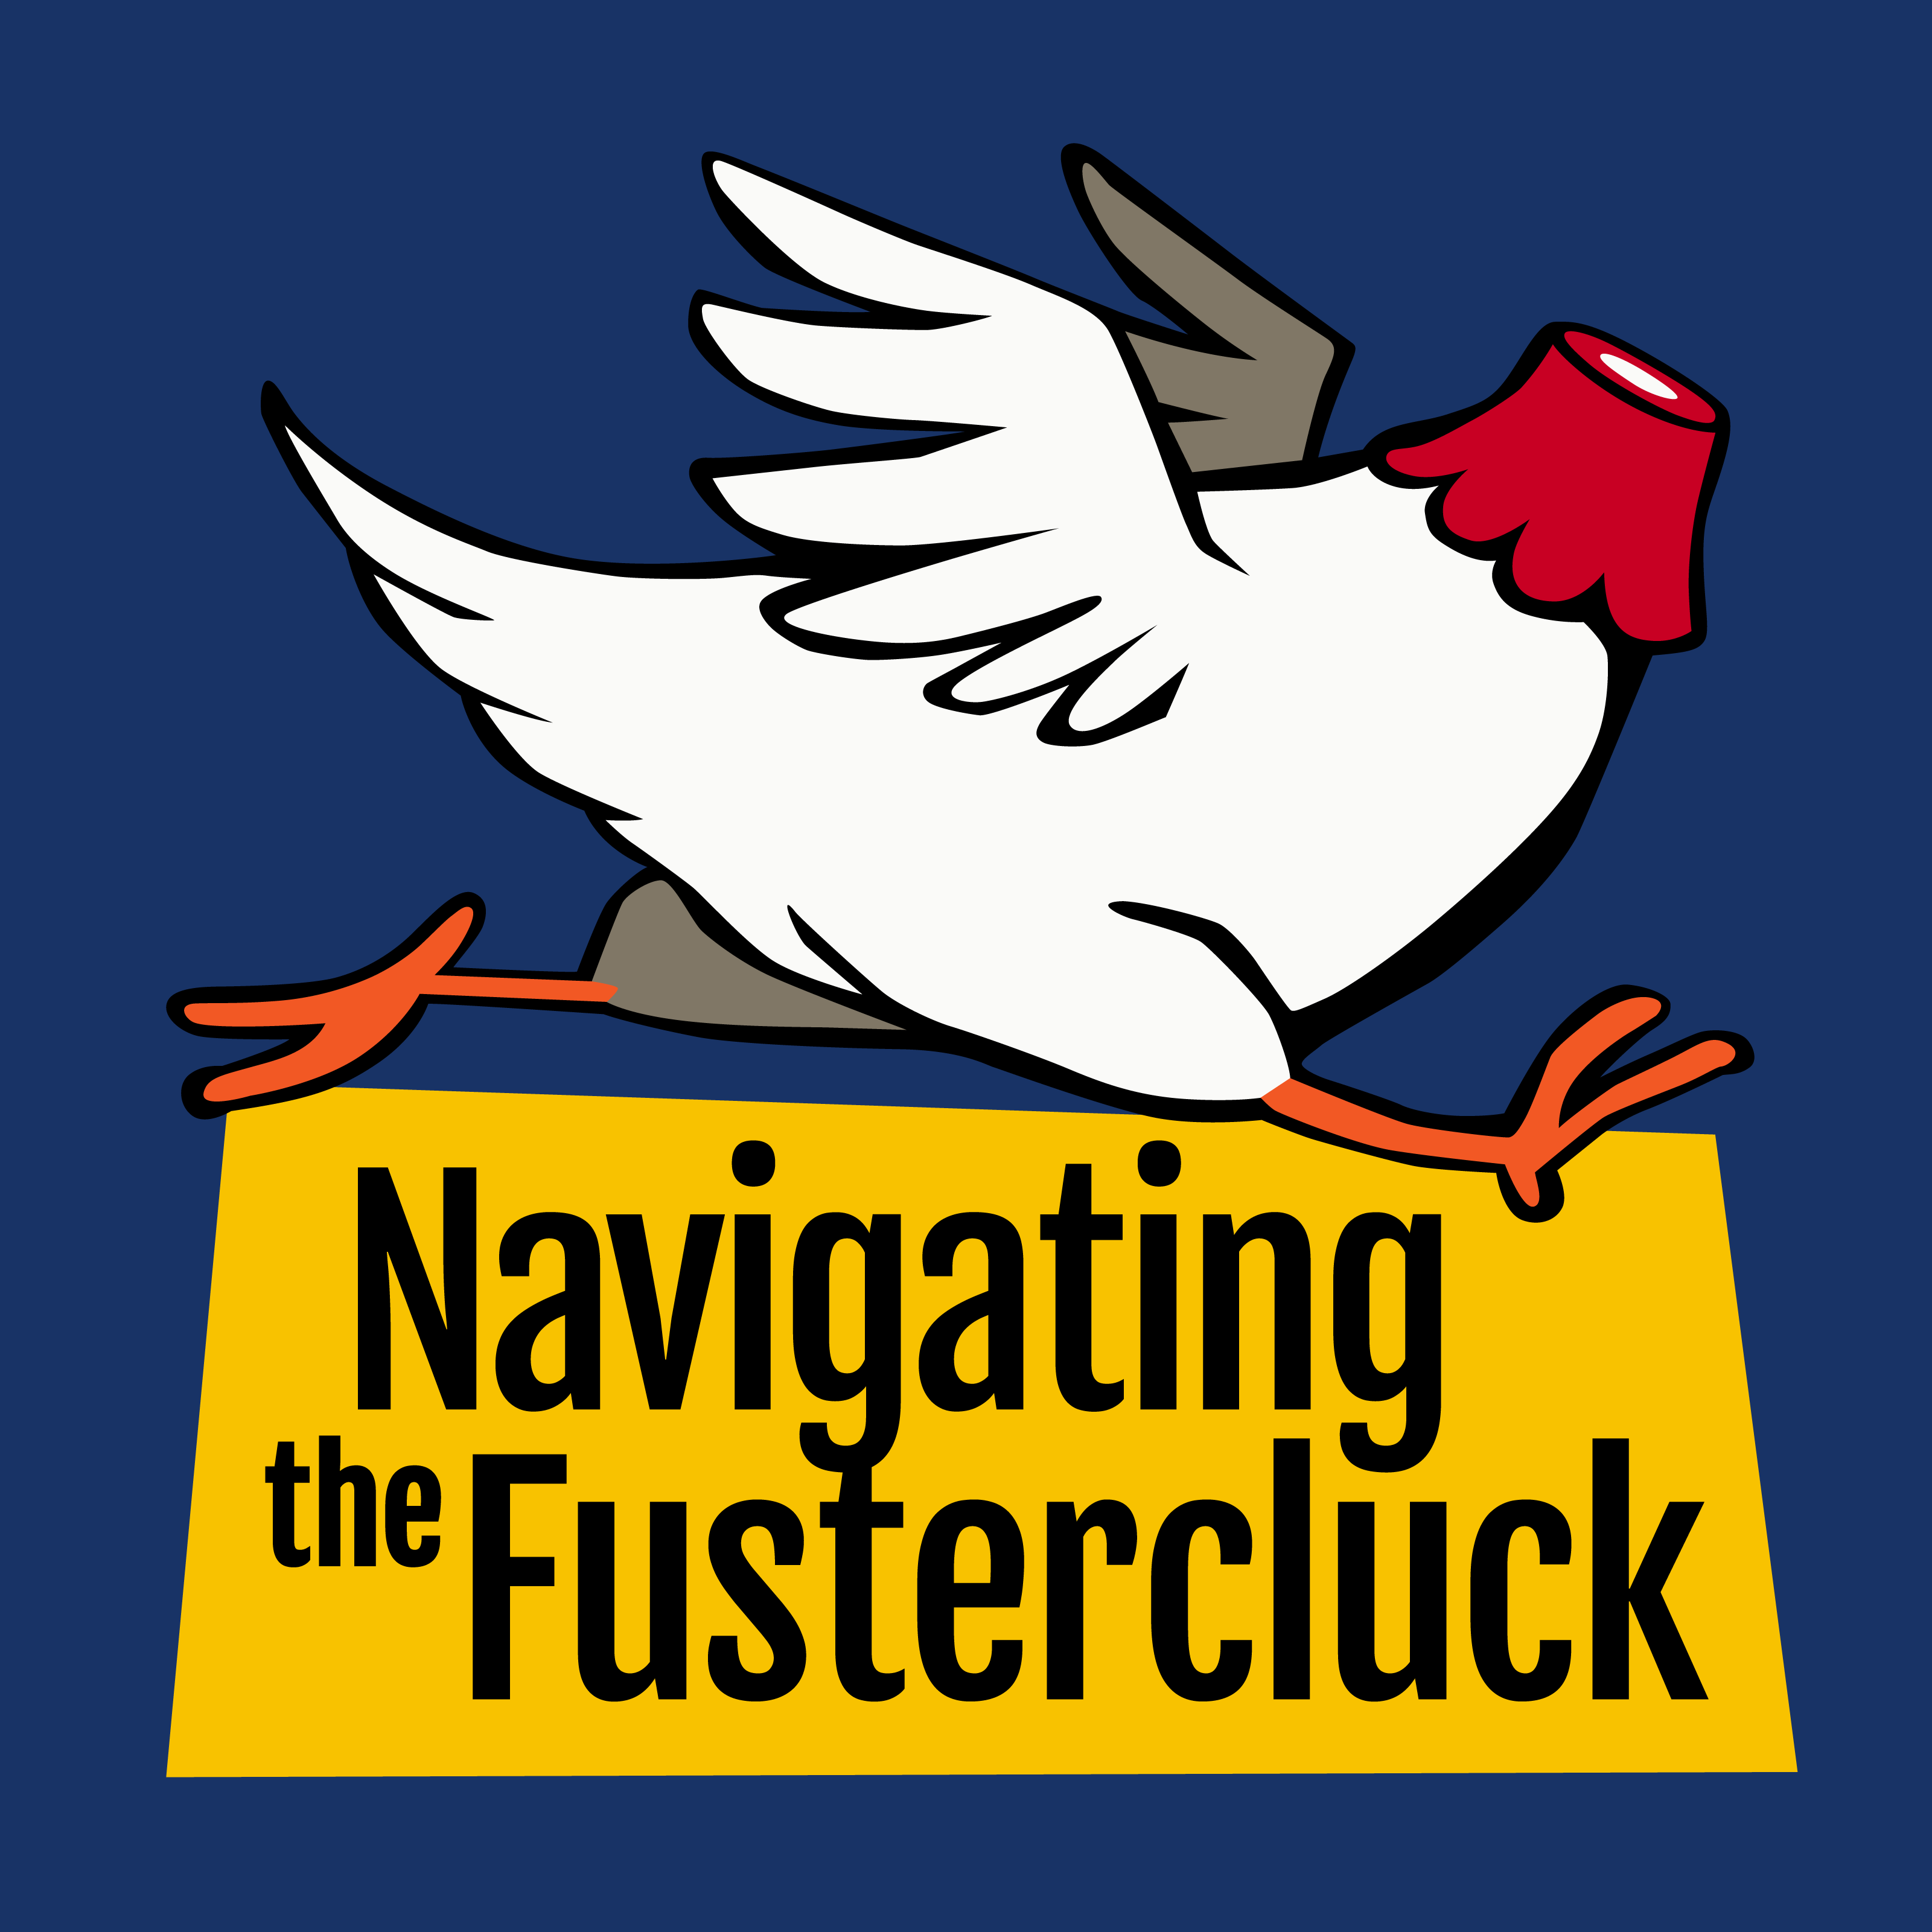 Navigating the Fustercluck